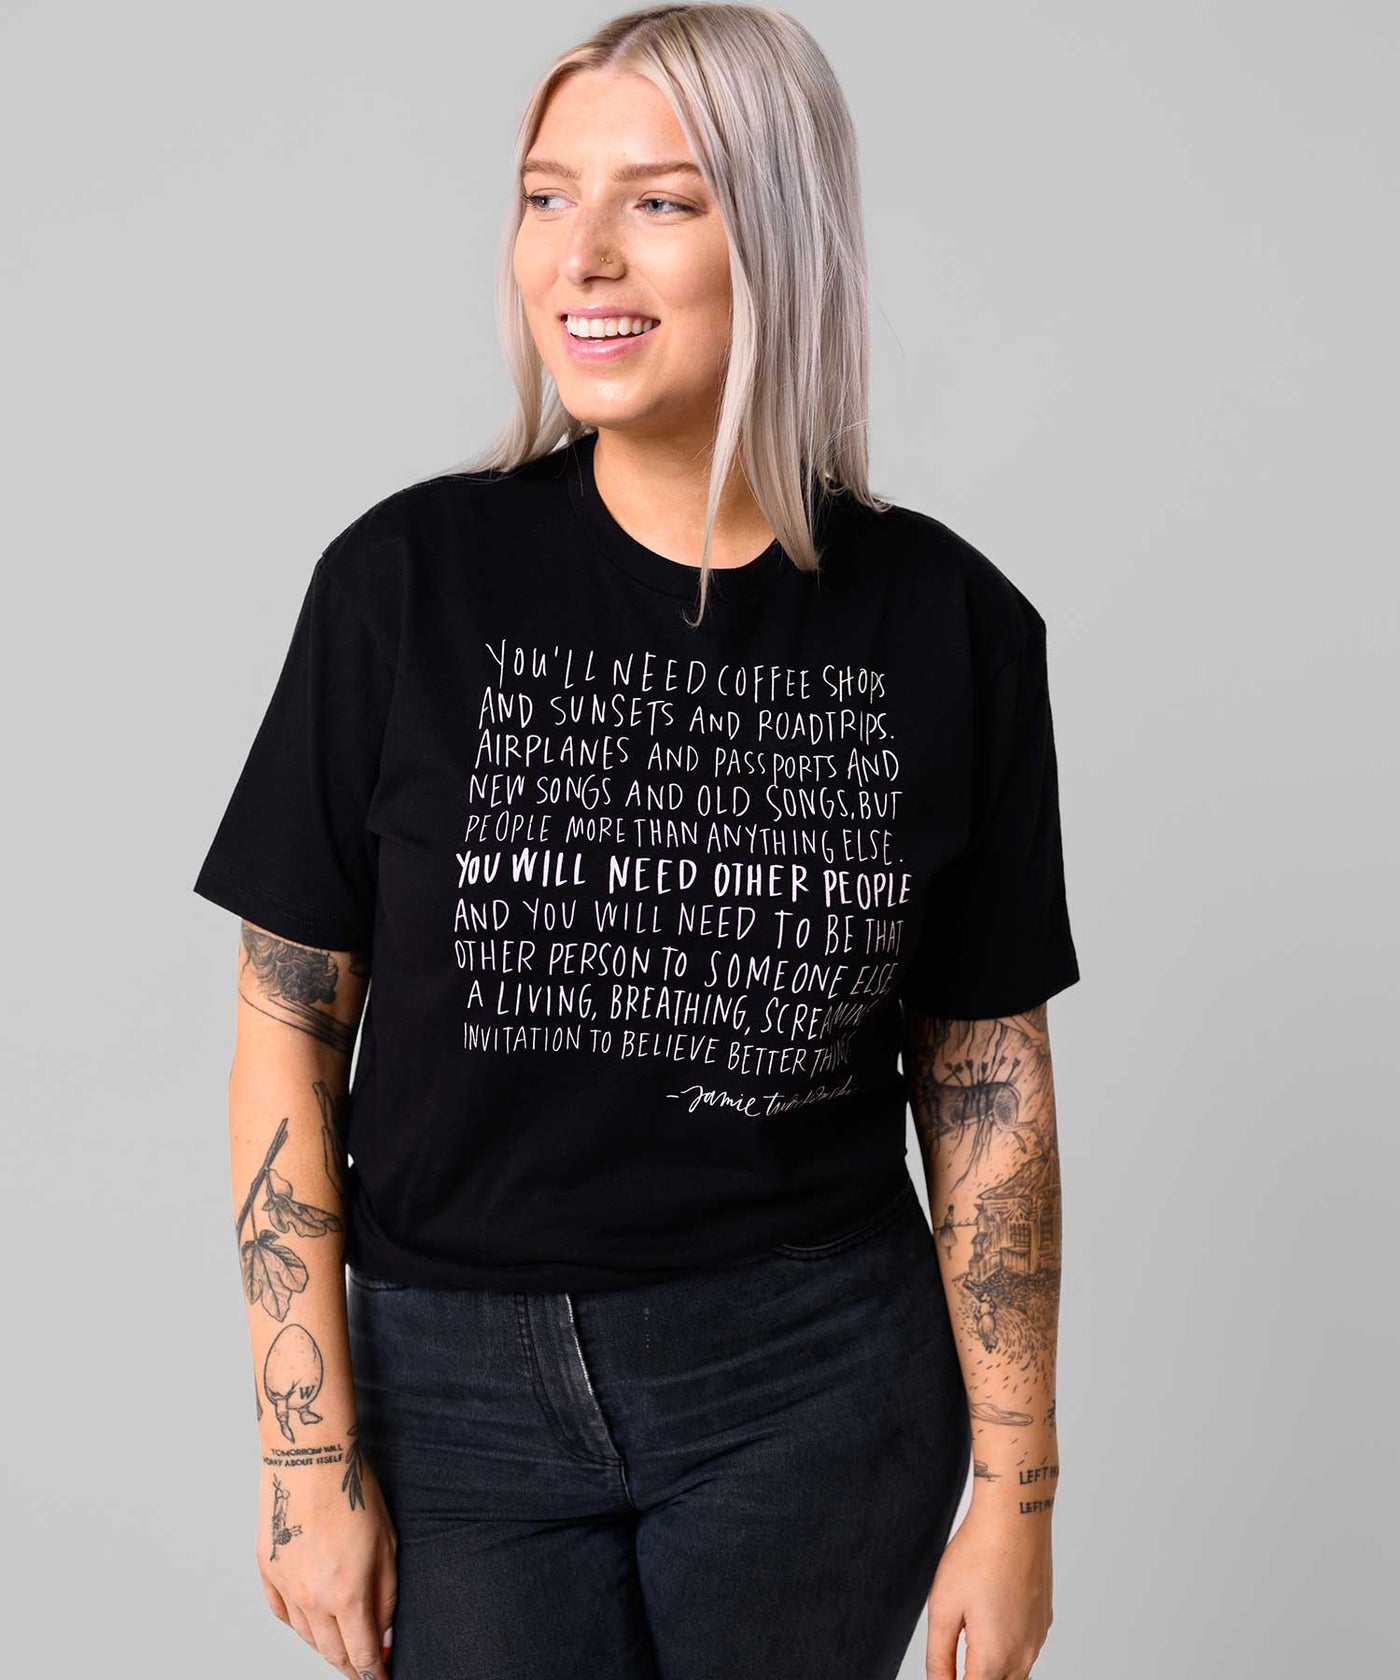 Reblog Shirt – To Write Love on Her Arms.